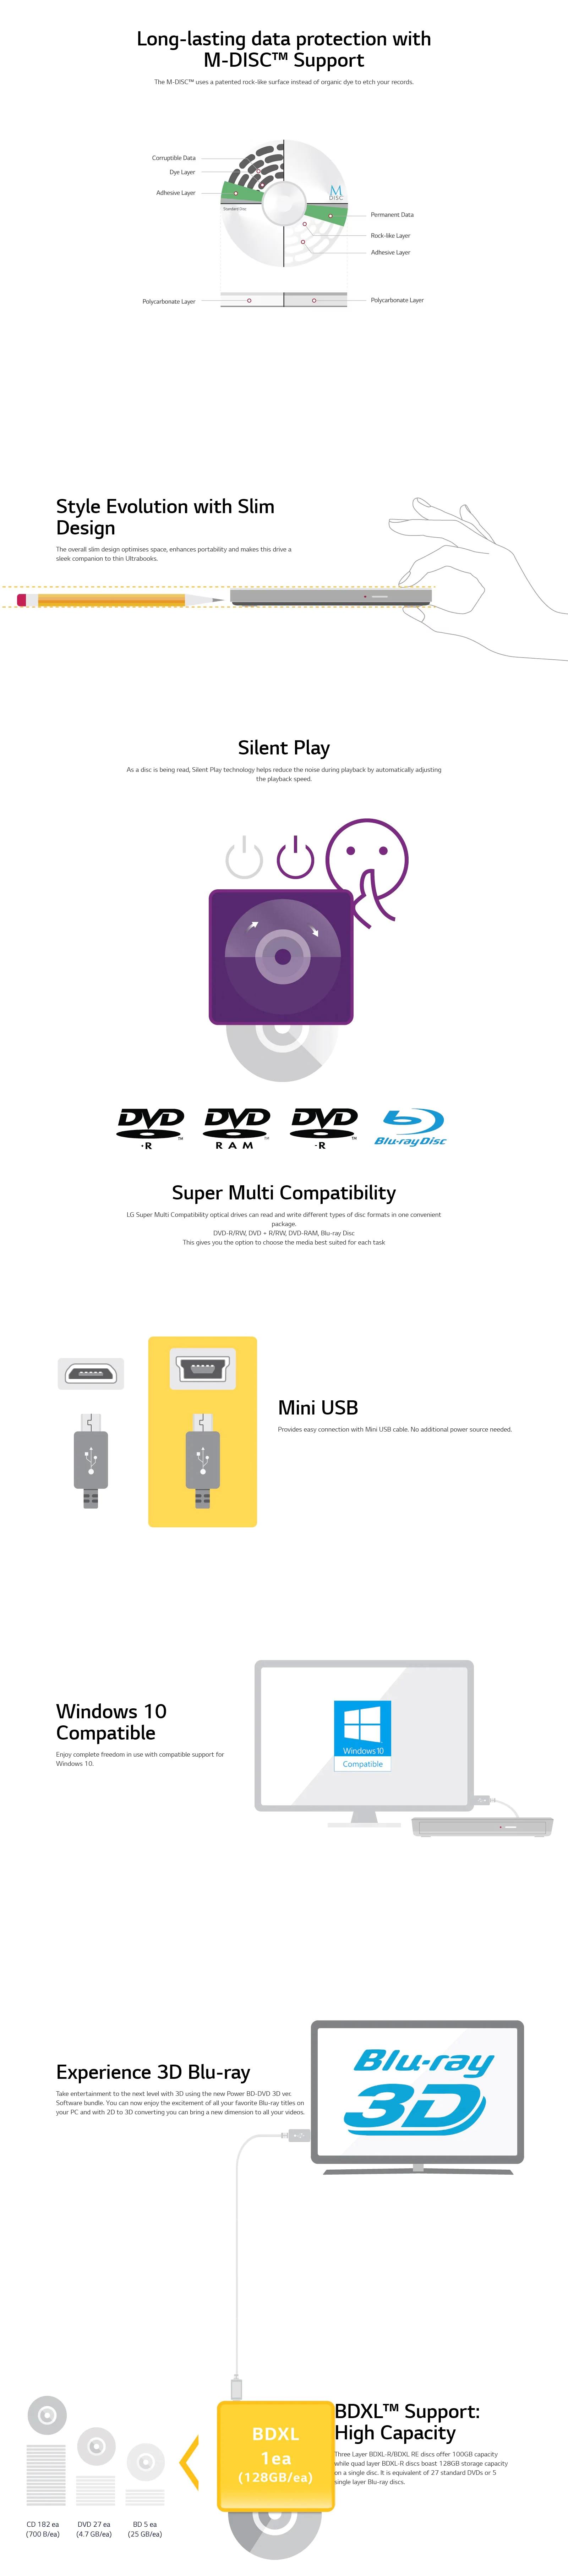 A large marketing image providing additional information about the product LG BP50NB40 Slim Portable External Mini USB Blu-Ray and DVD Writer - Additional alt info not provided